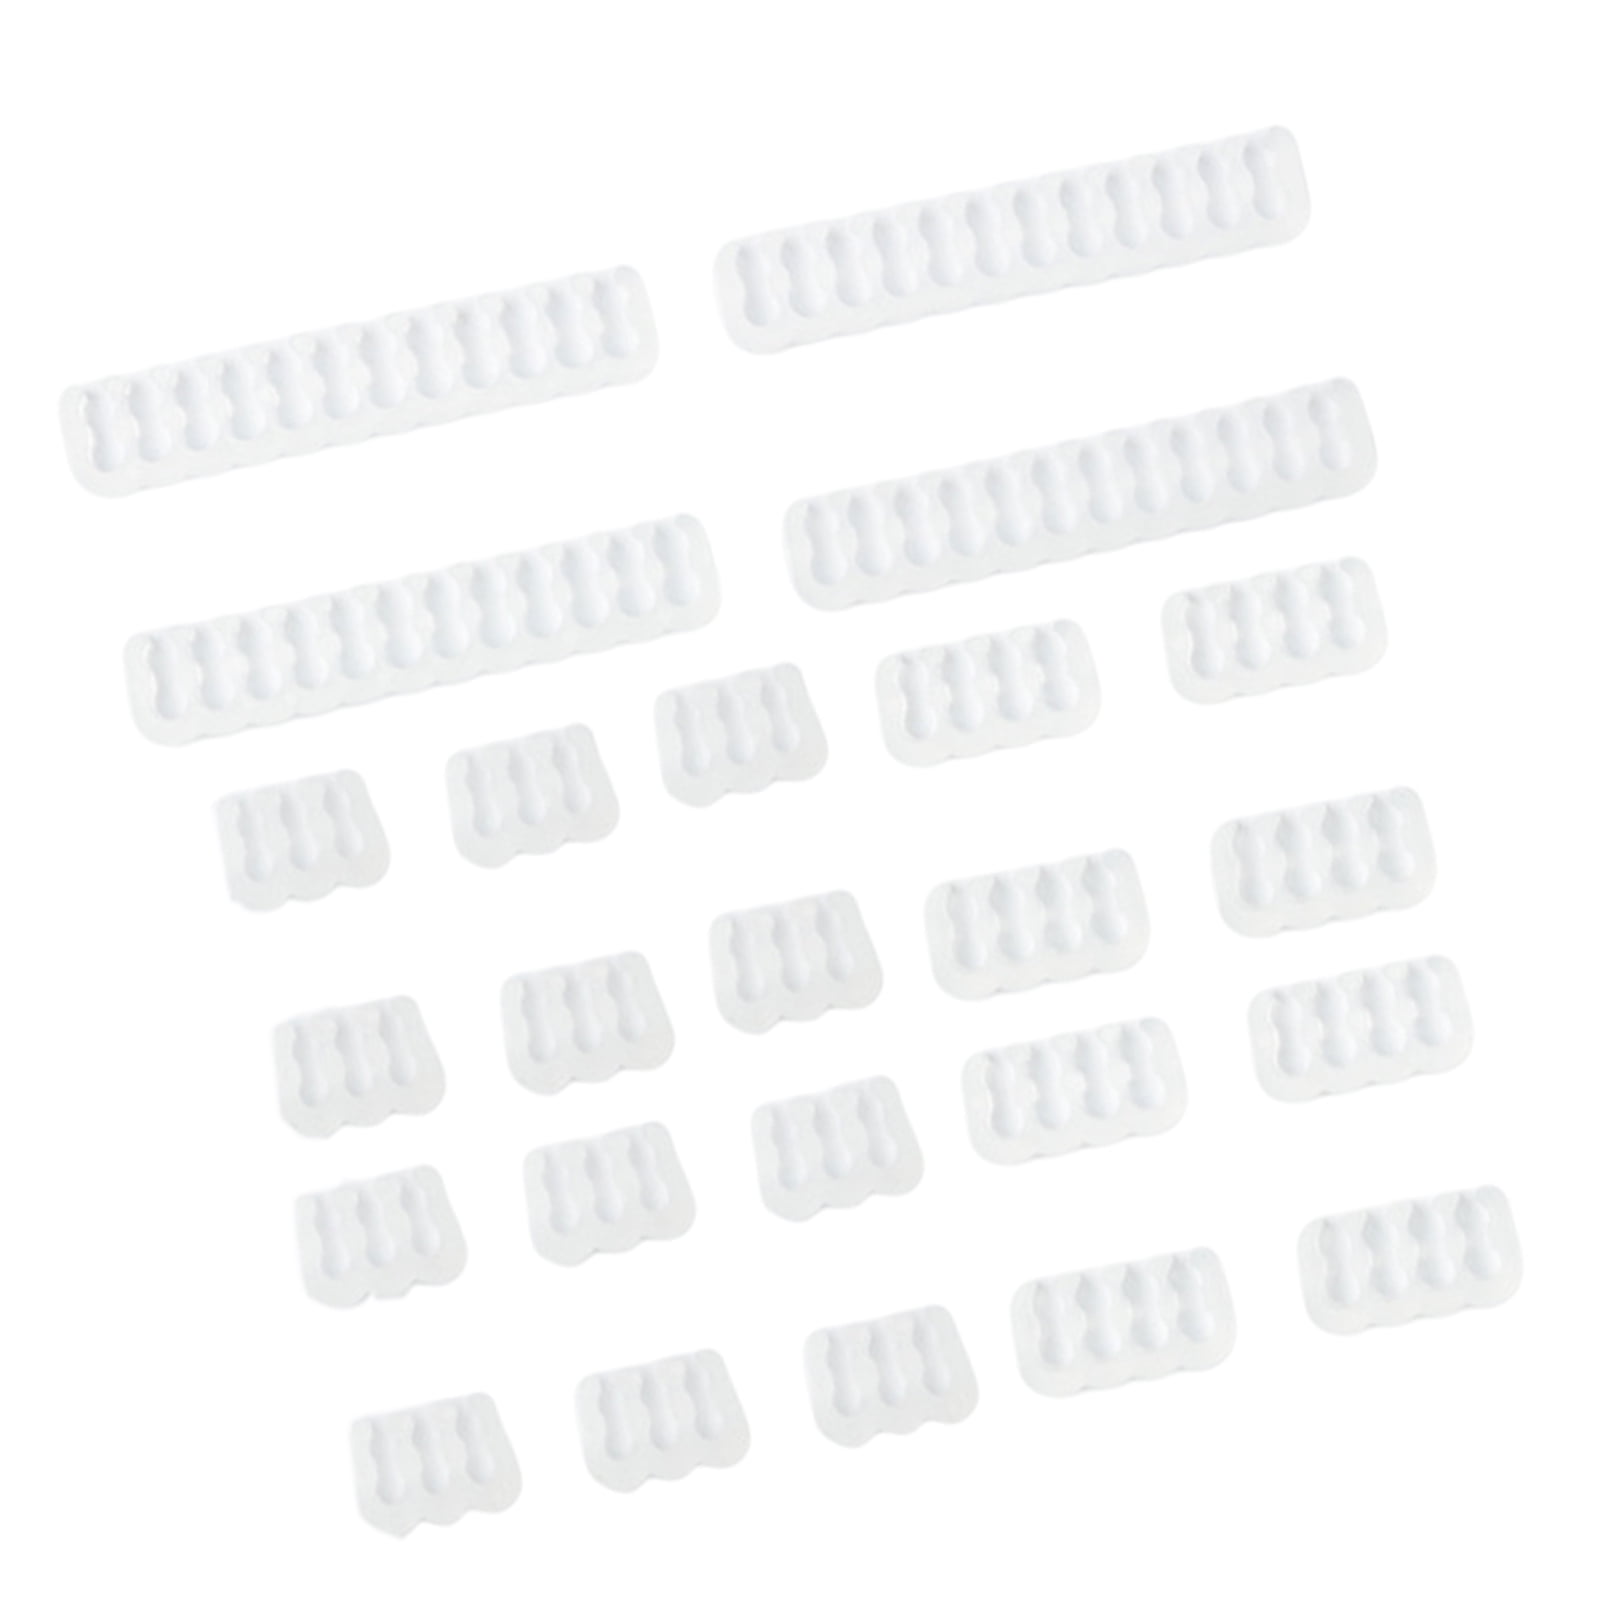 8 x 6-pin for 3.6mm Cable（White） 12 x 8-pin Extension Cable Comb One Set Including 4 x 24-pin